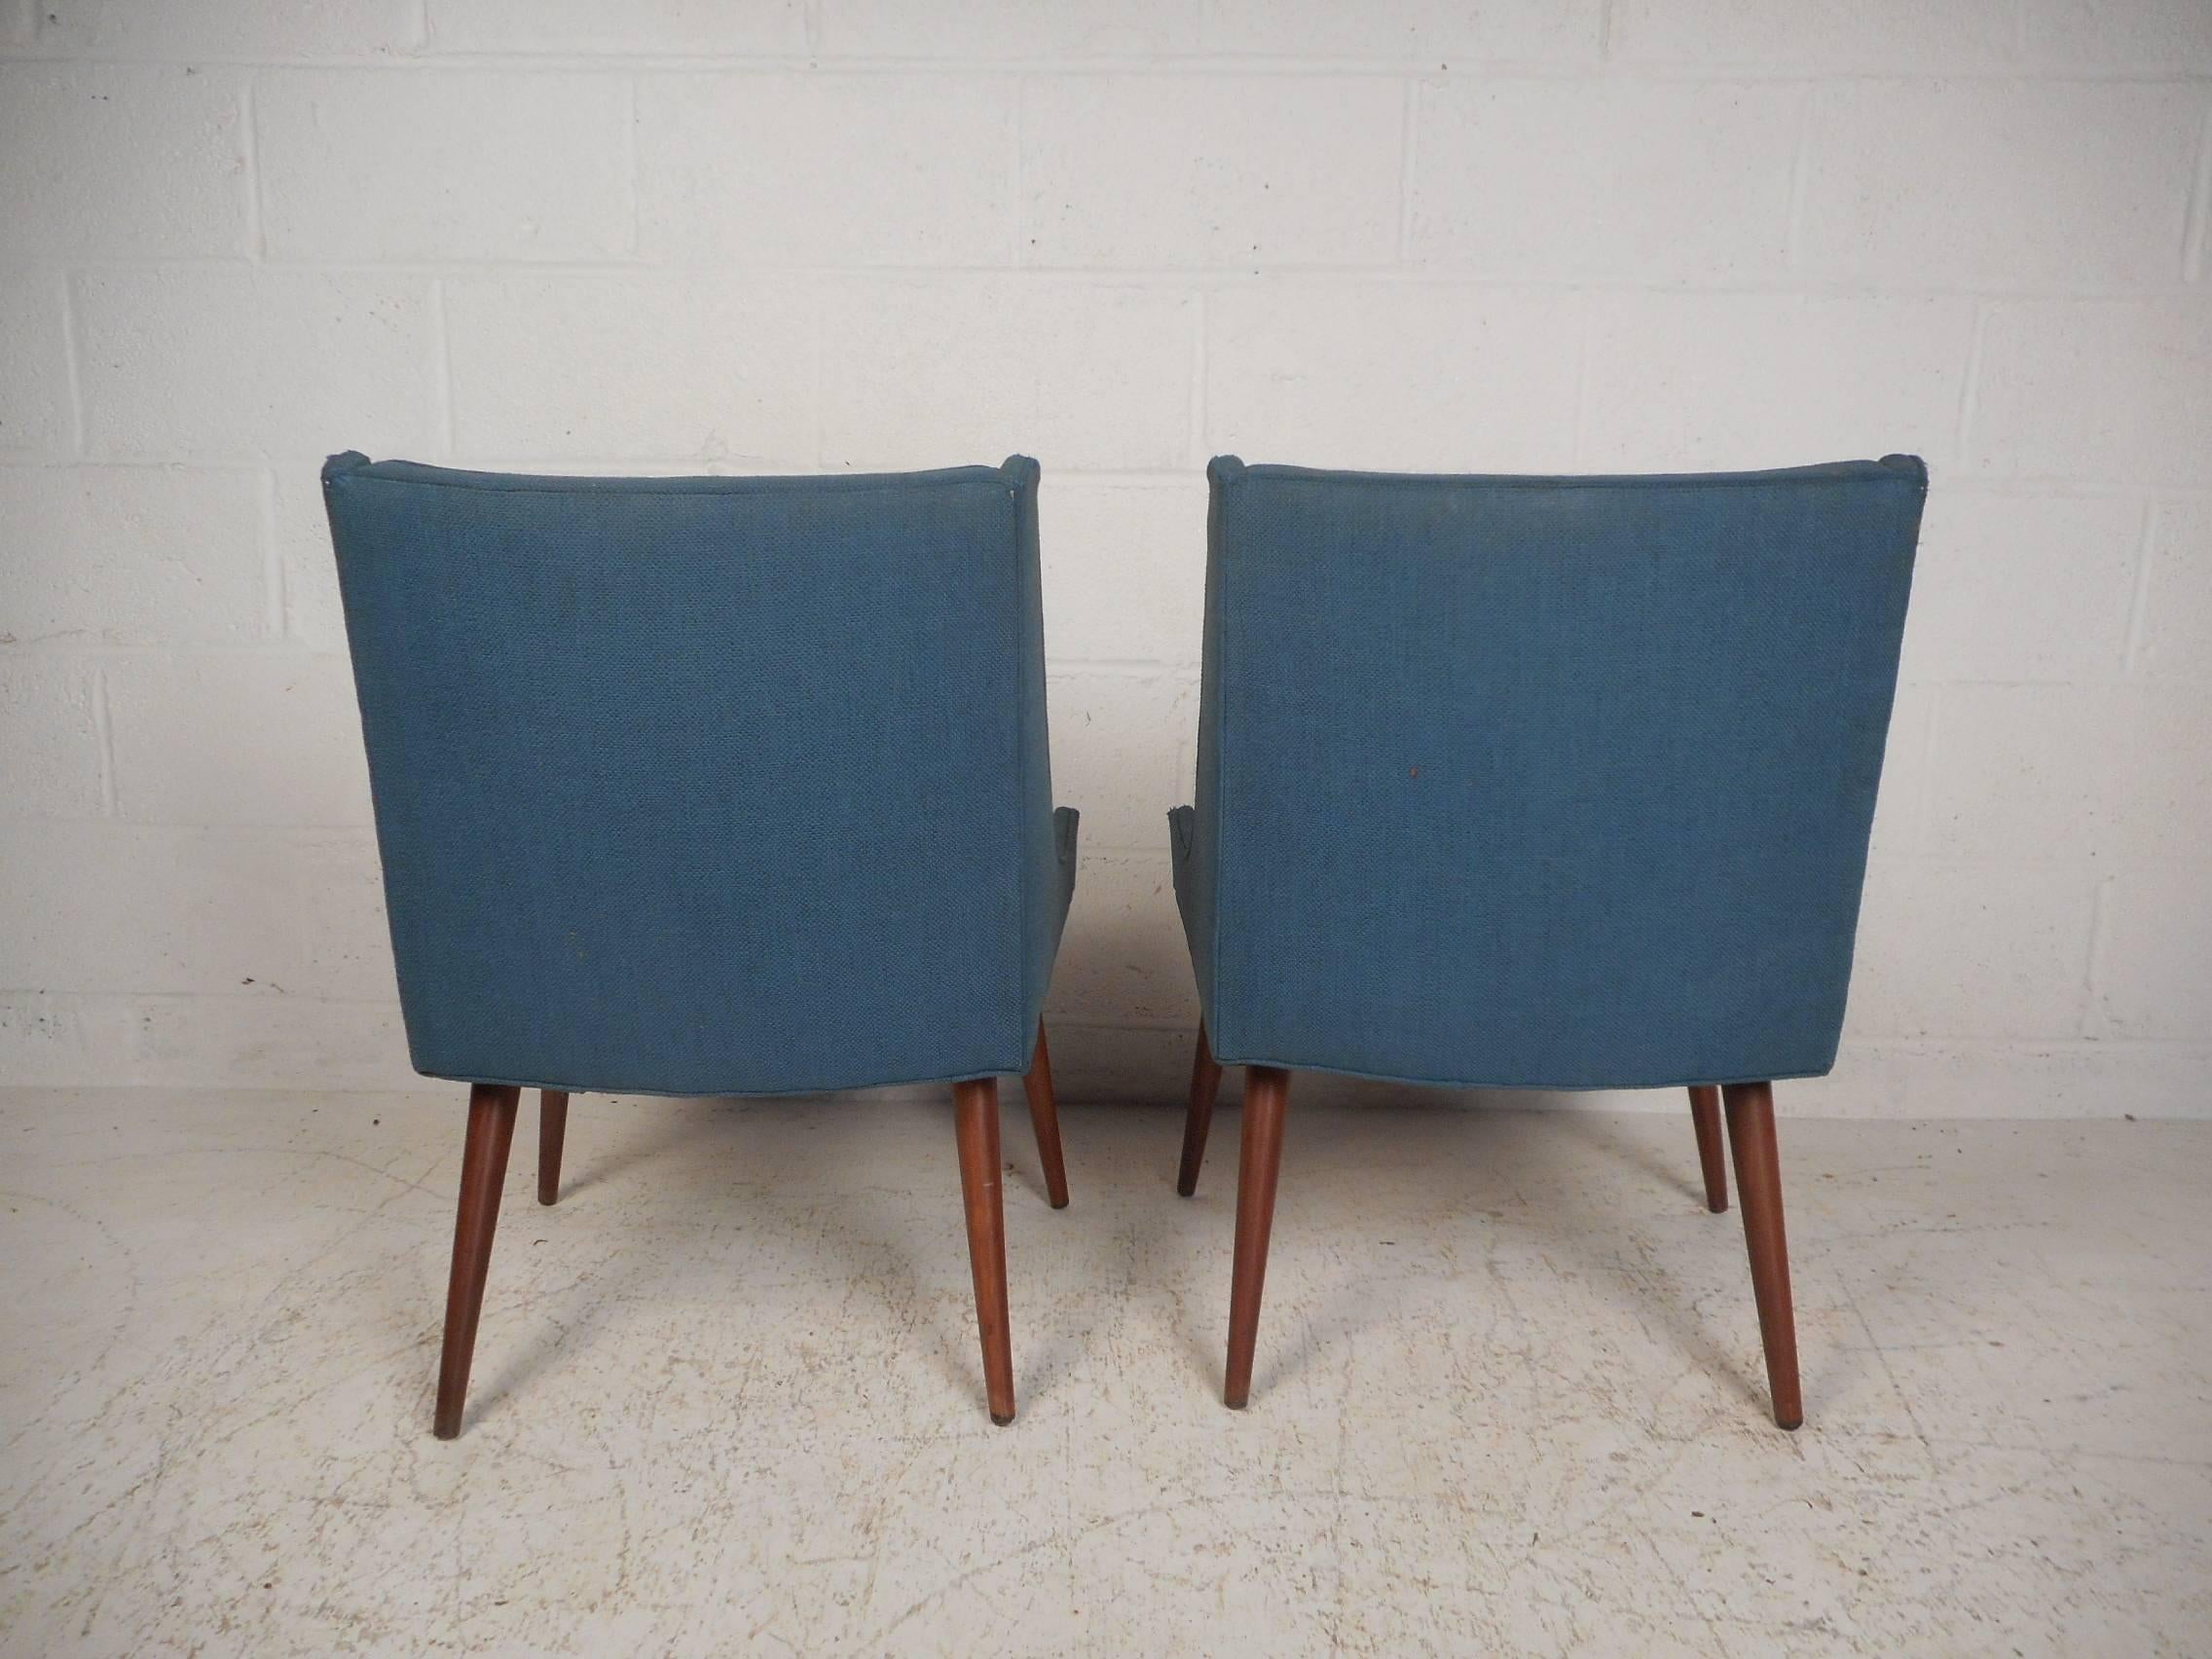 Late 20th Century Pair of Mid-Century Modern Side Chairs by Milo Baughman for Thayer Coggin For Sale